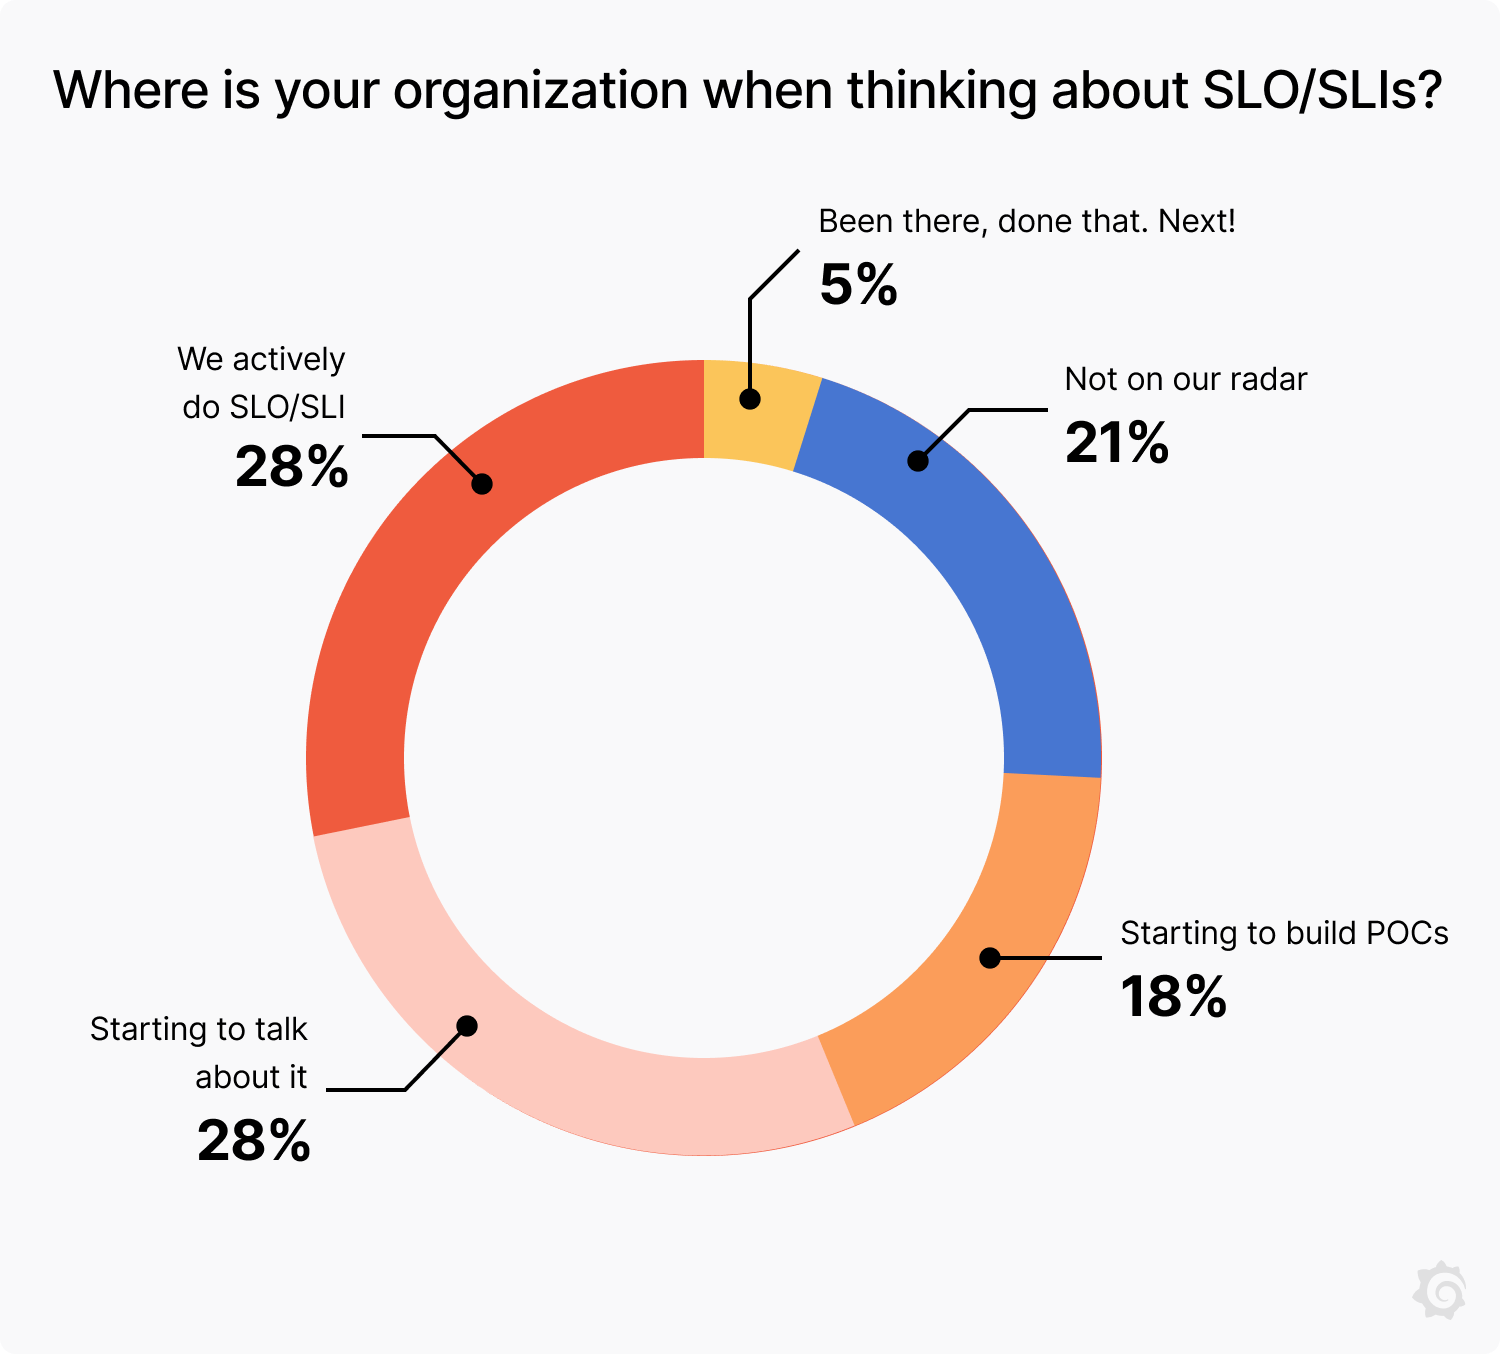 Donut chart showing opinions about SLOs/SLIs.